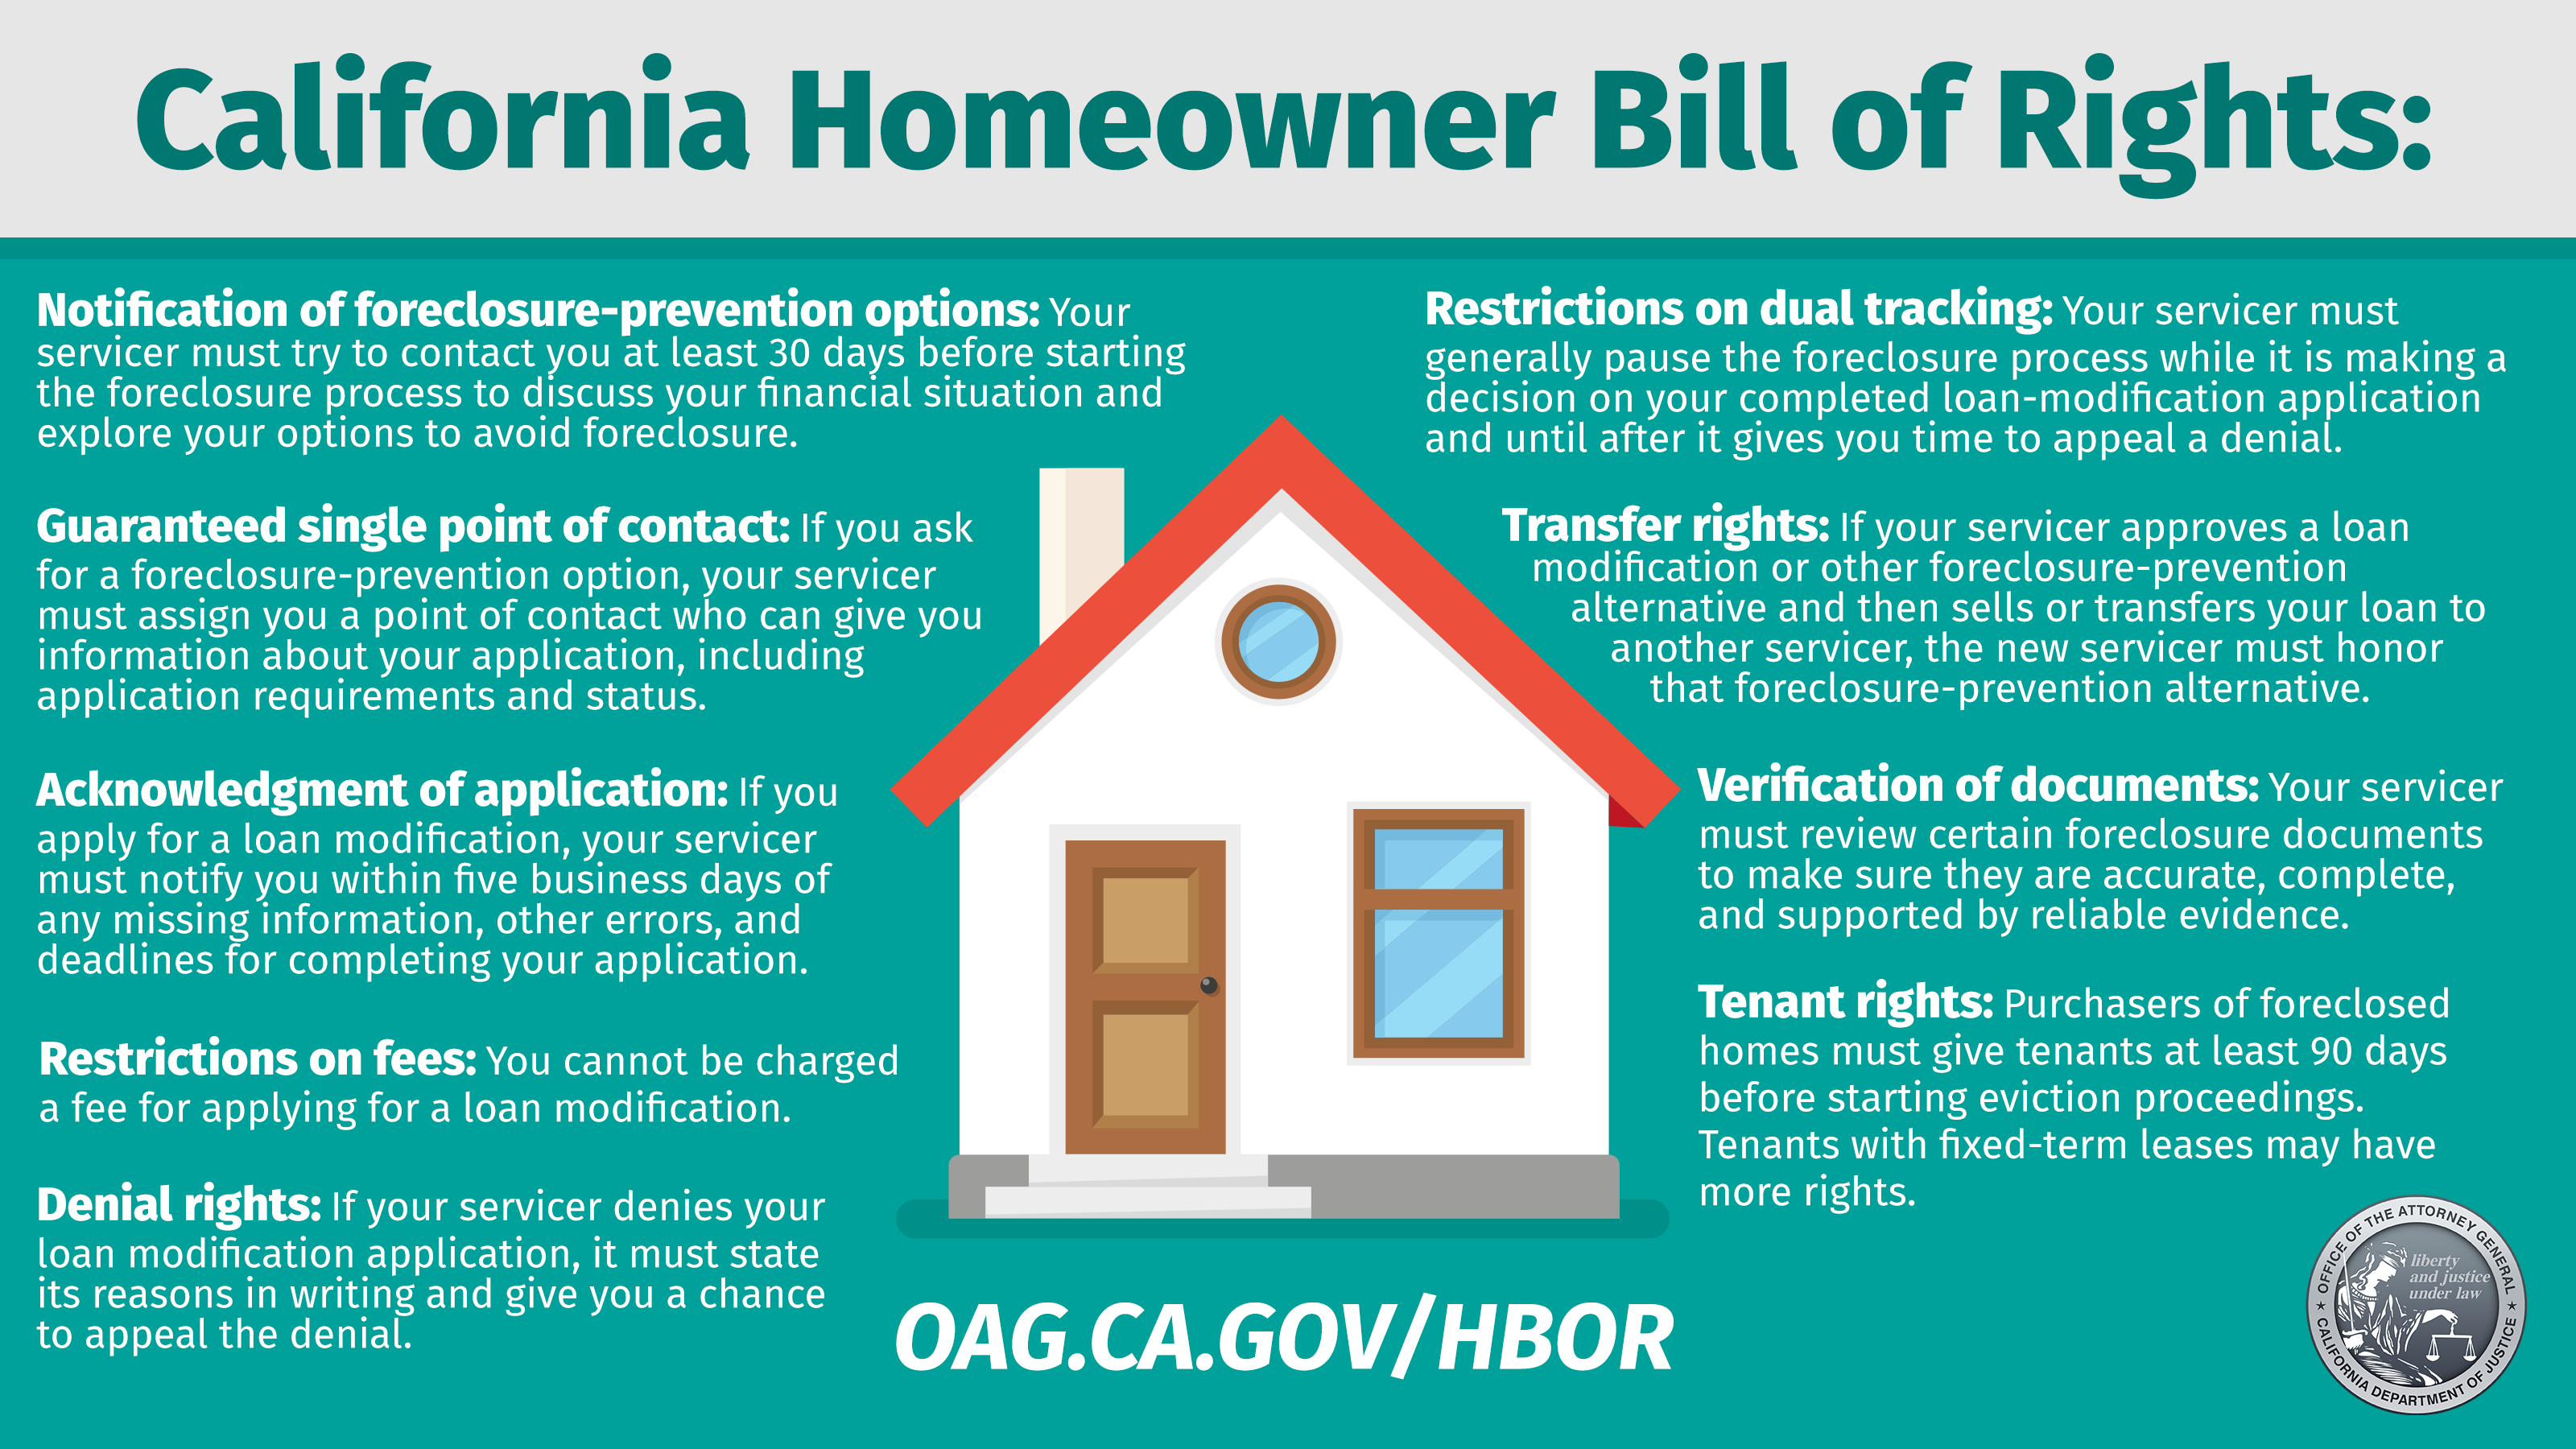 California Homeowner Bill of Rights. PhotoCredit: State of CA Department of Justice